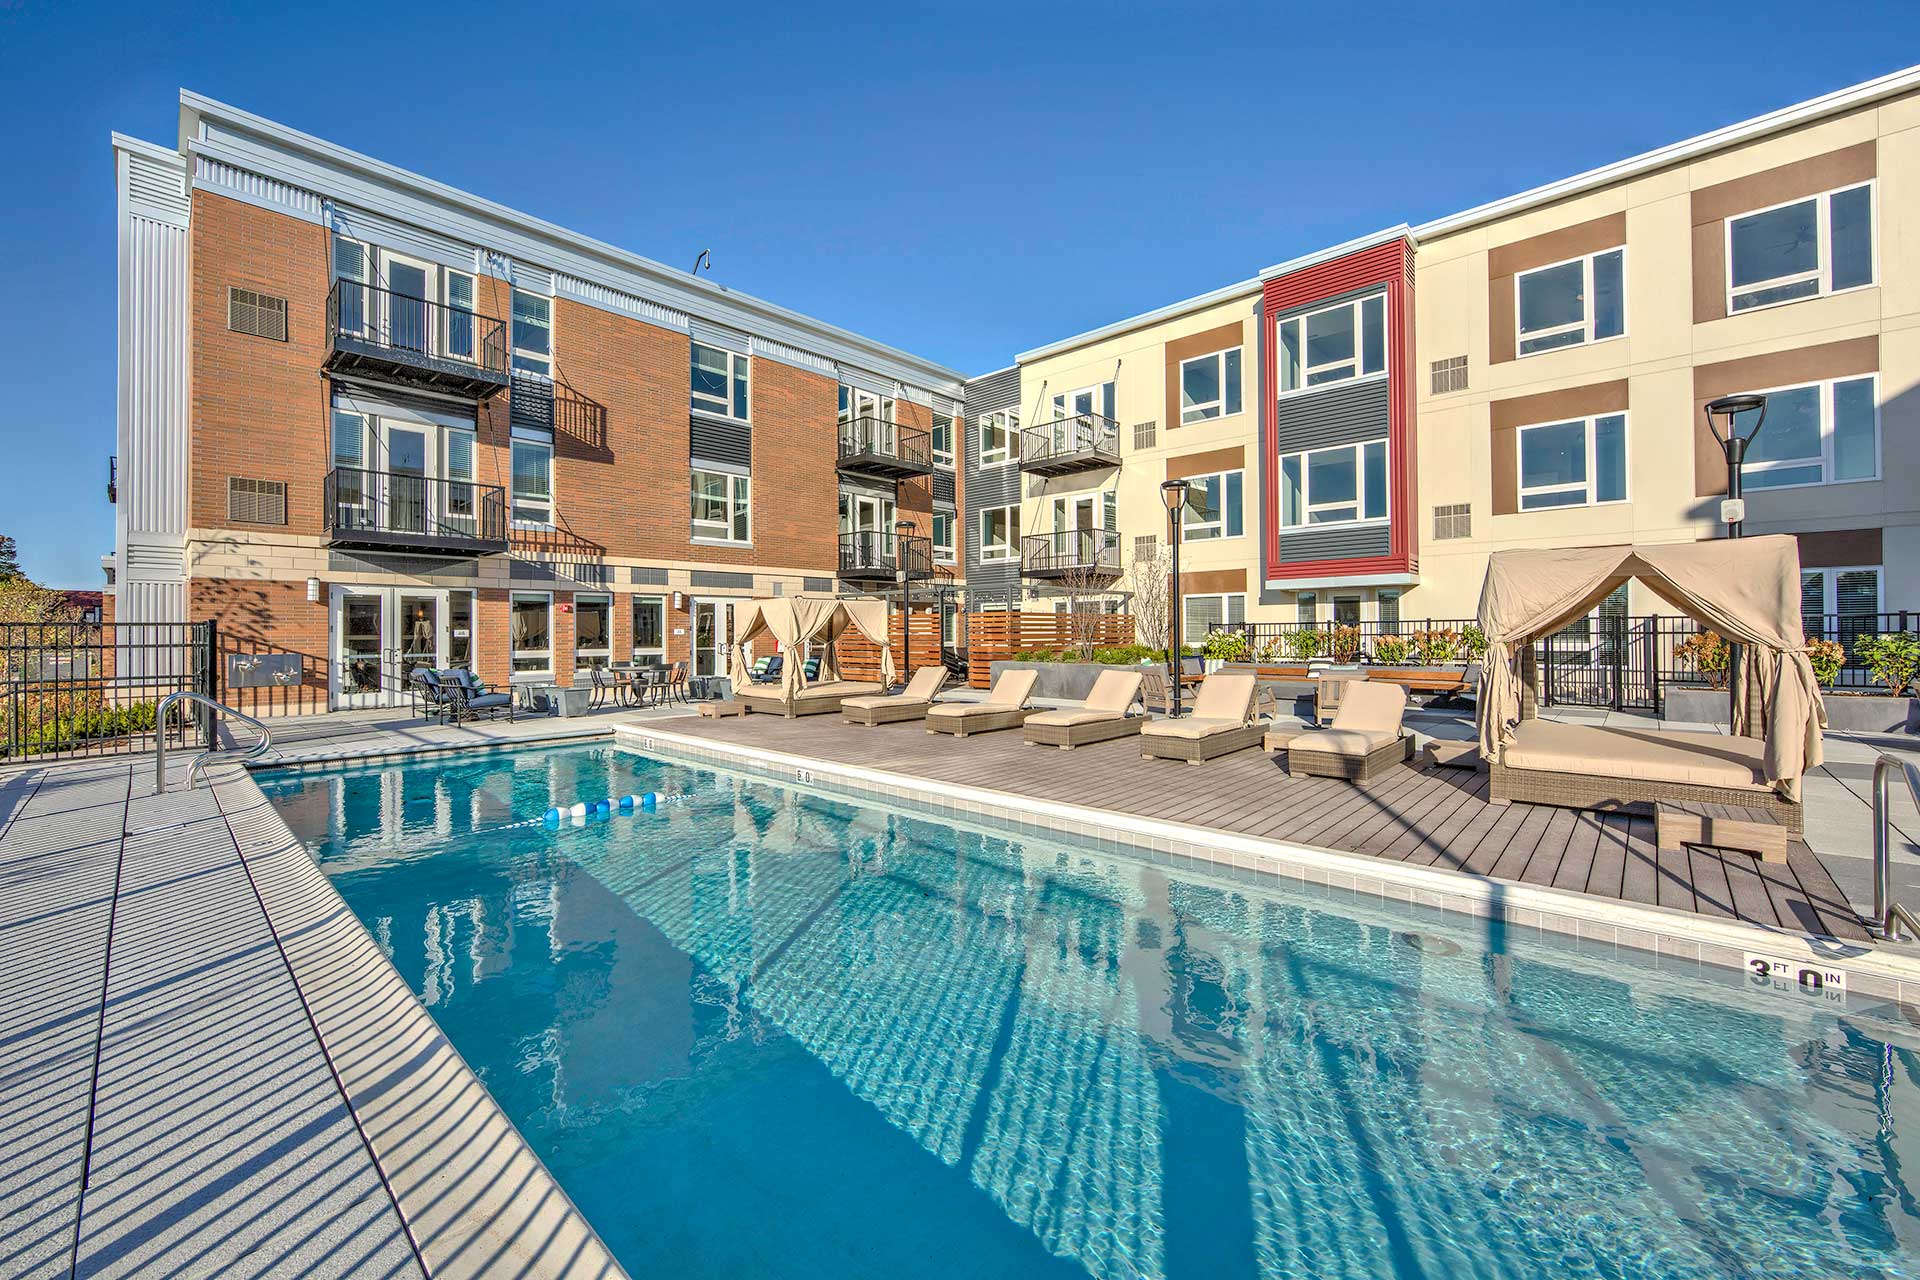 Outdoor pool at Park 205 apartment residence